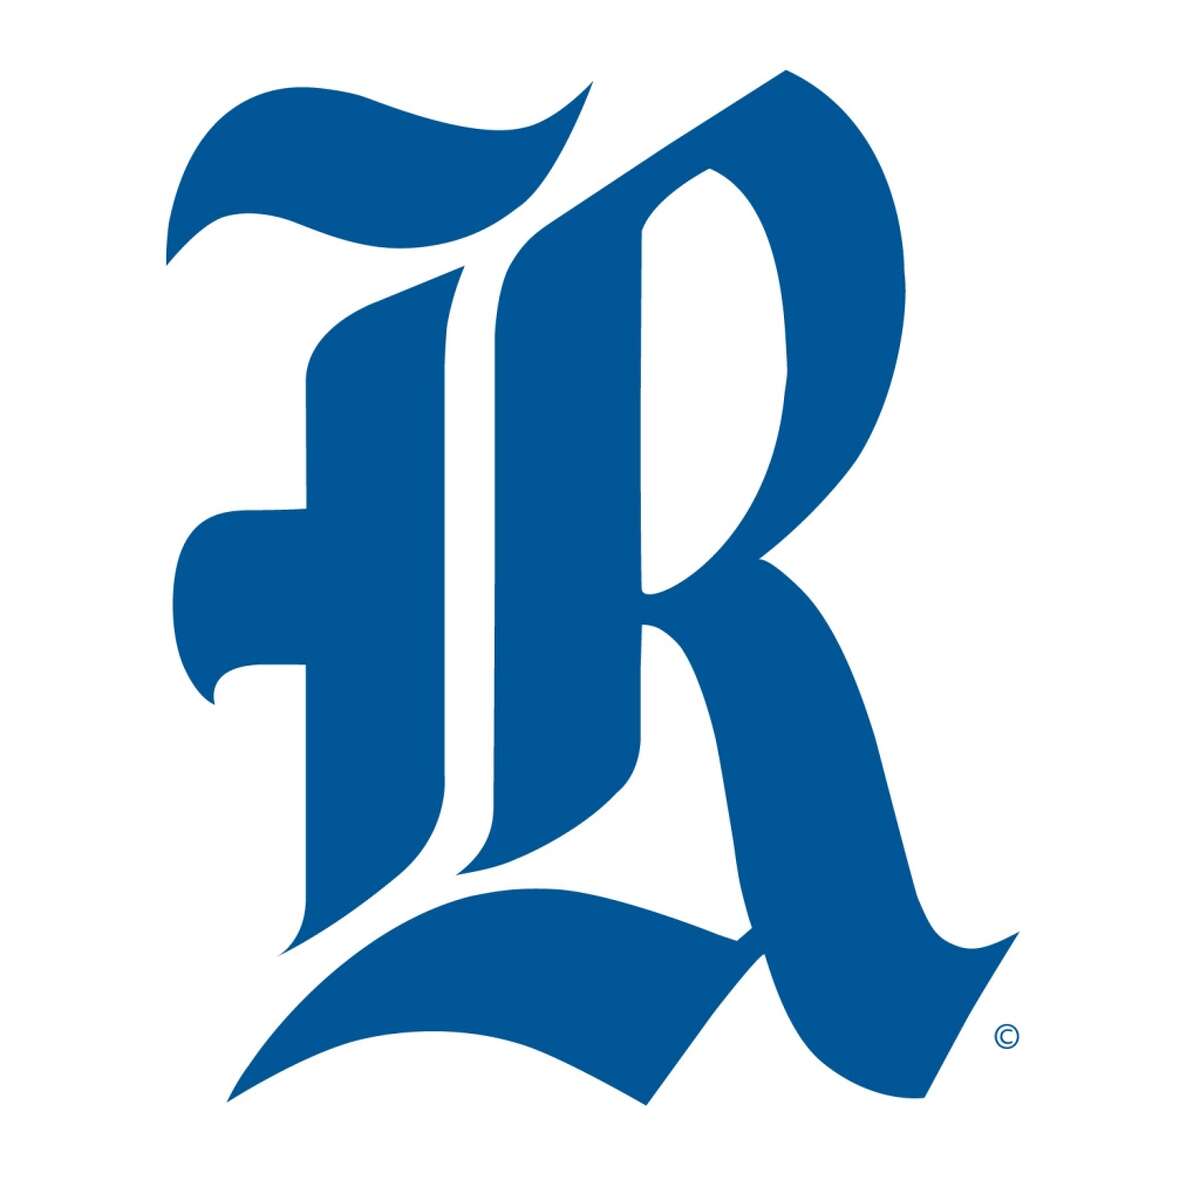 For the third straight weekend, Rice's women's basketball team has had its games postponed, this time by a COVID-19 situation within the Owls program.